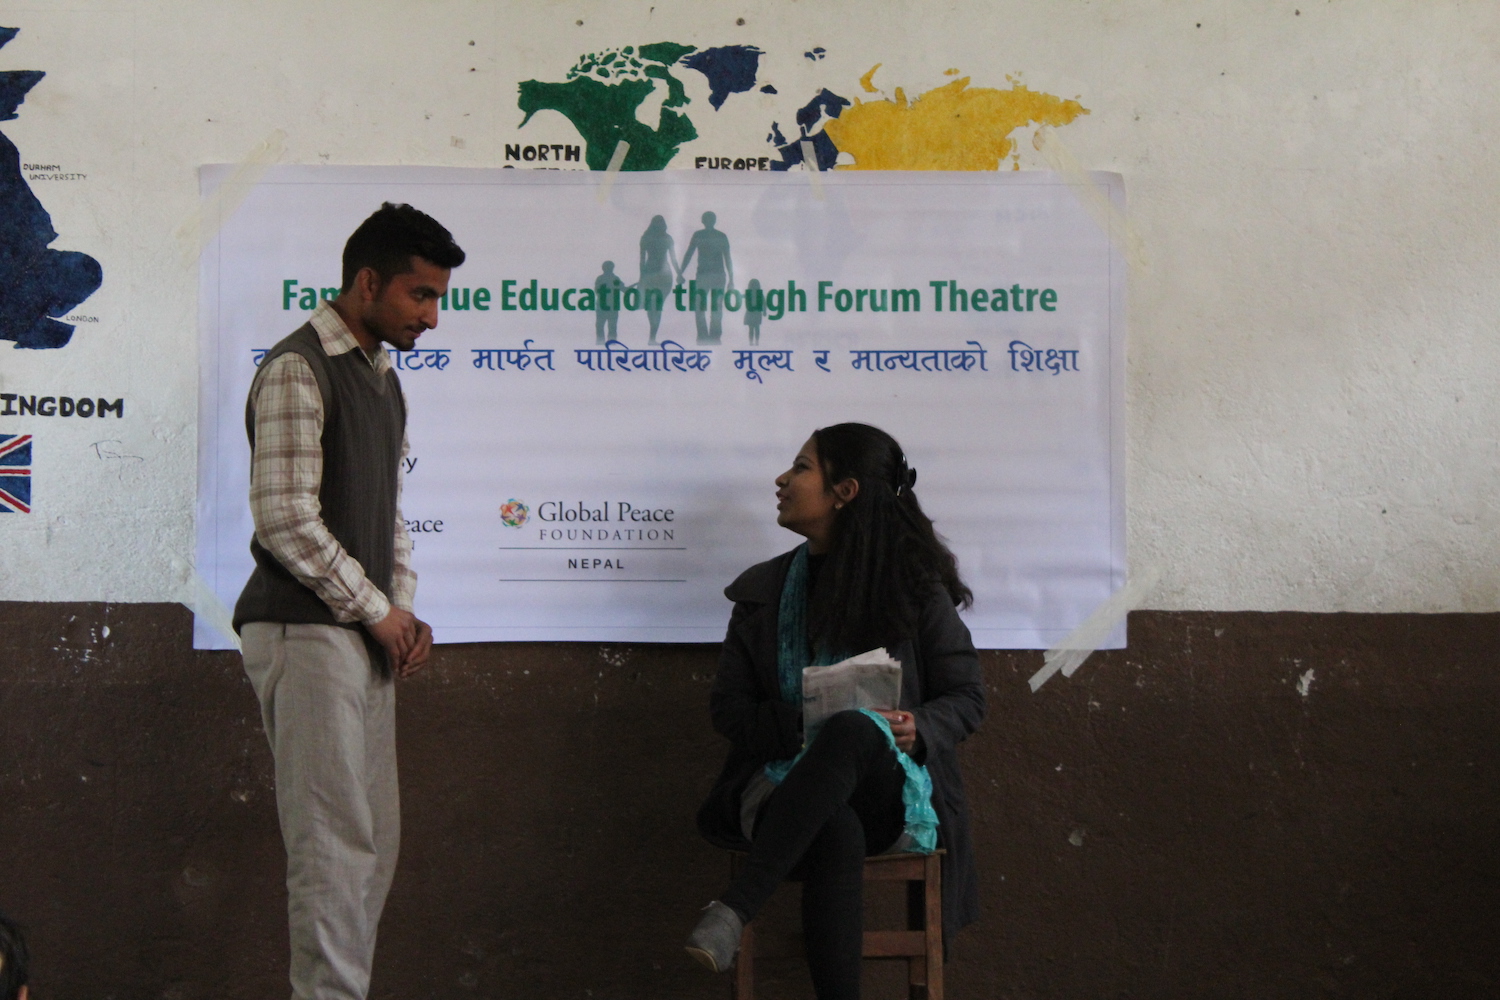 Actors perform during a Forum Theater organized by Sandhya Acharya